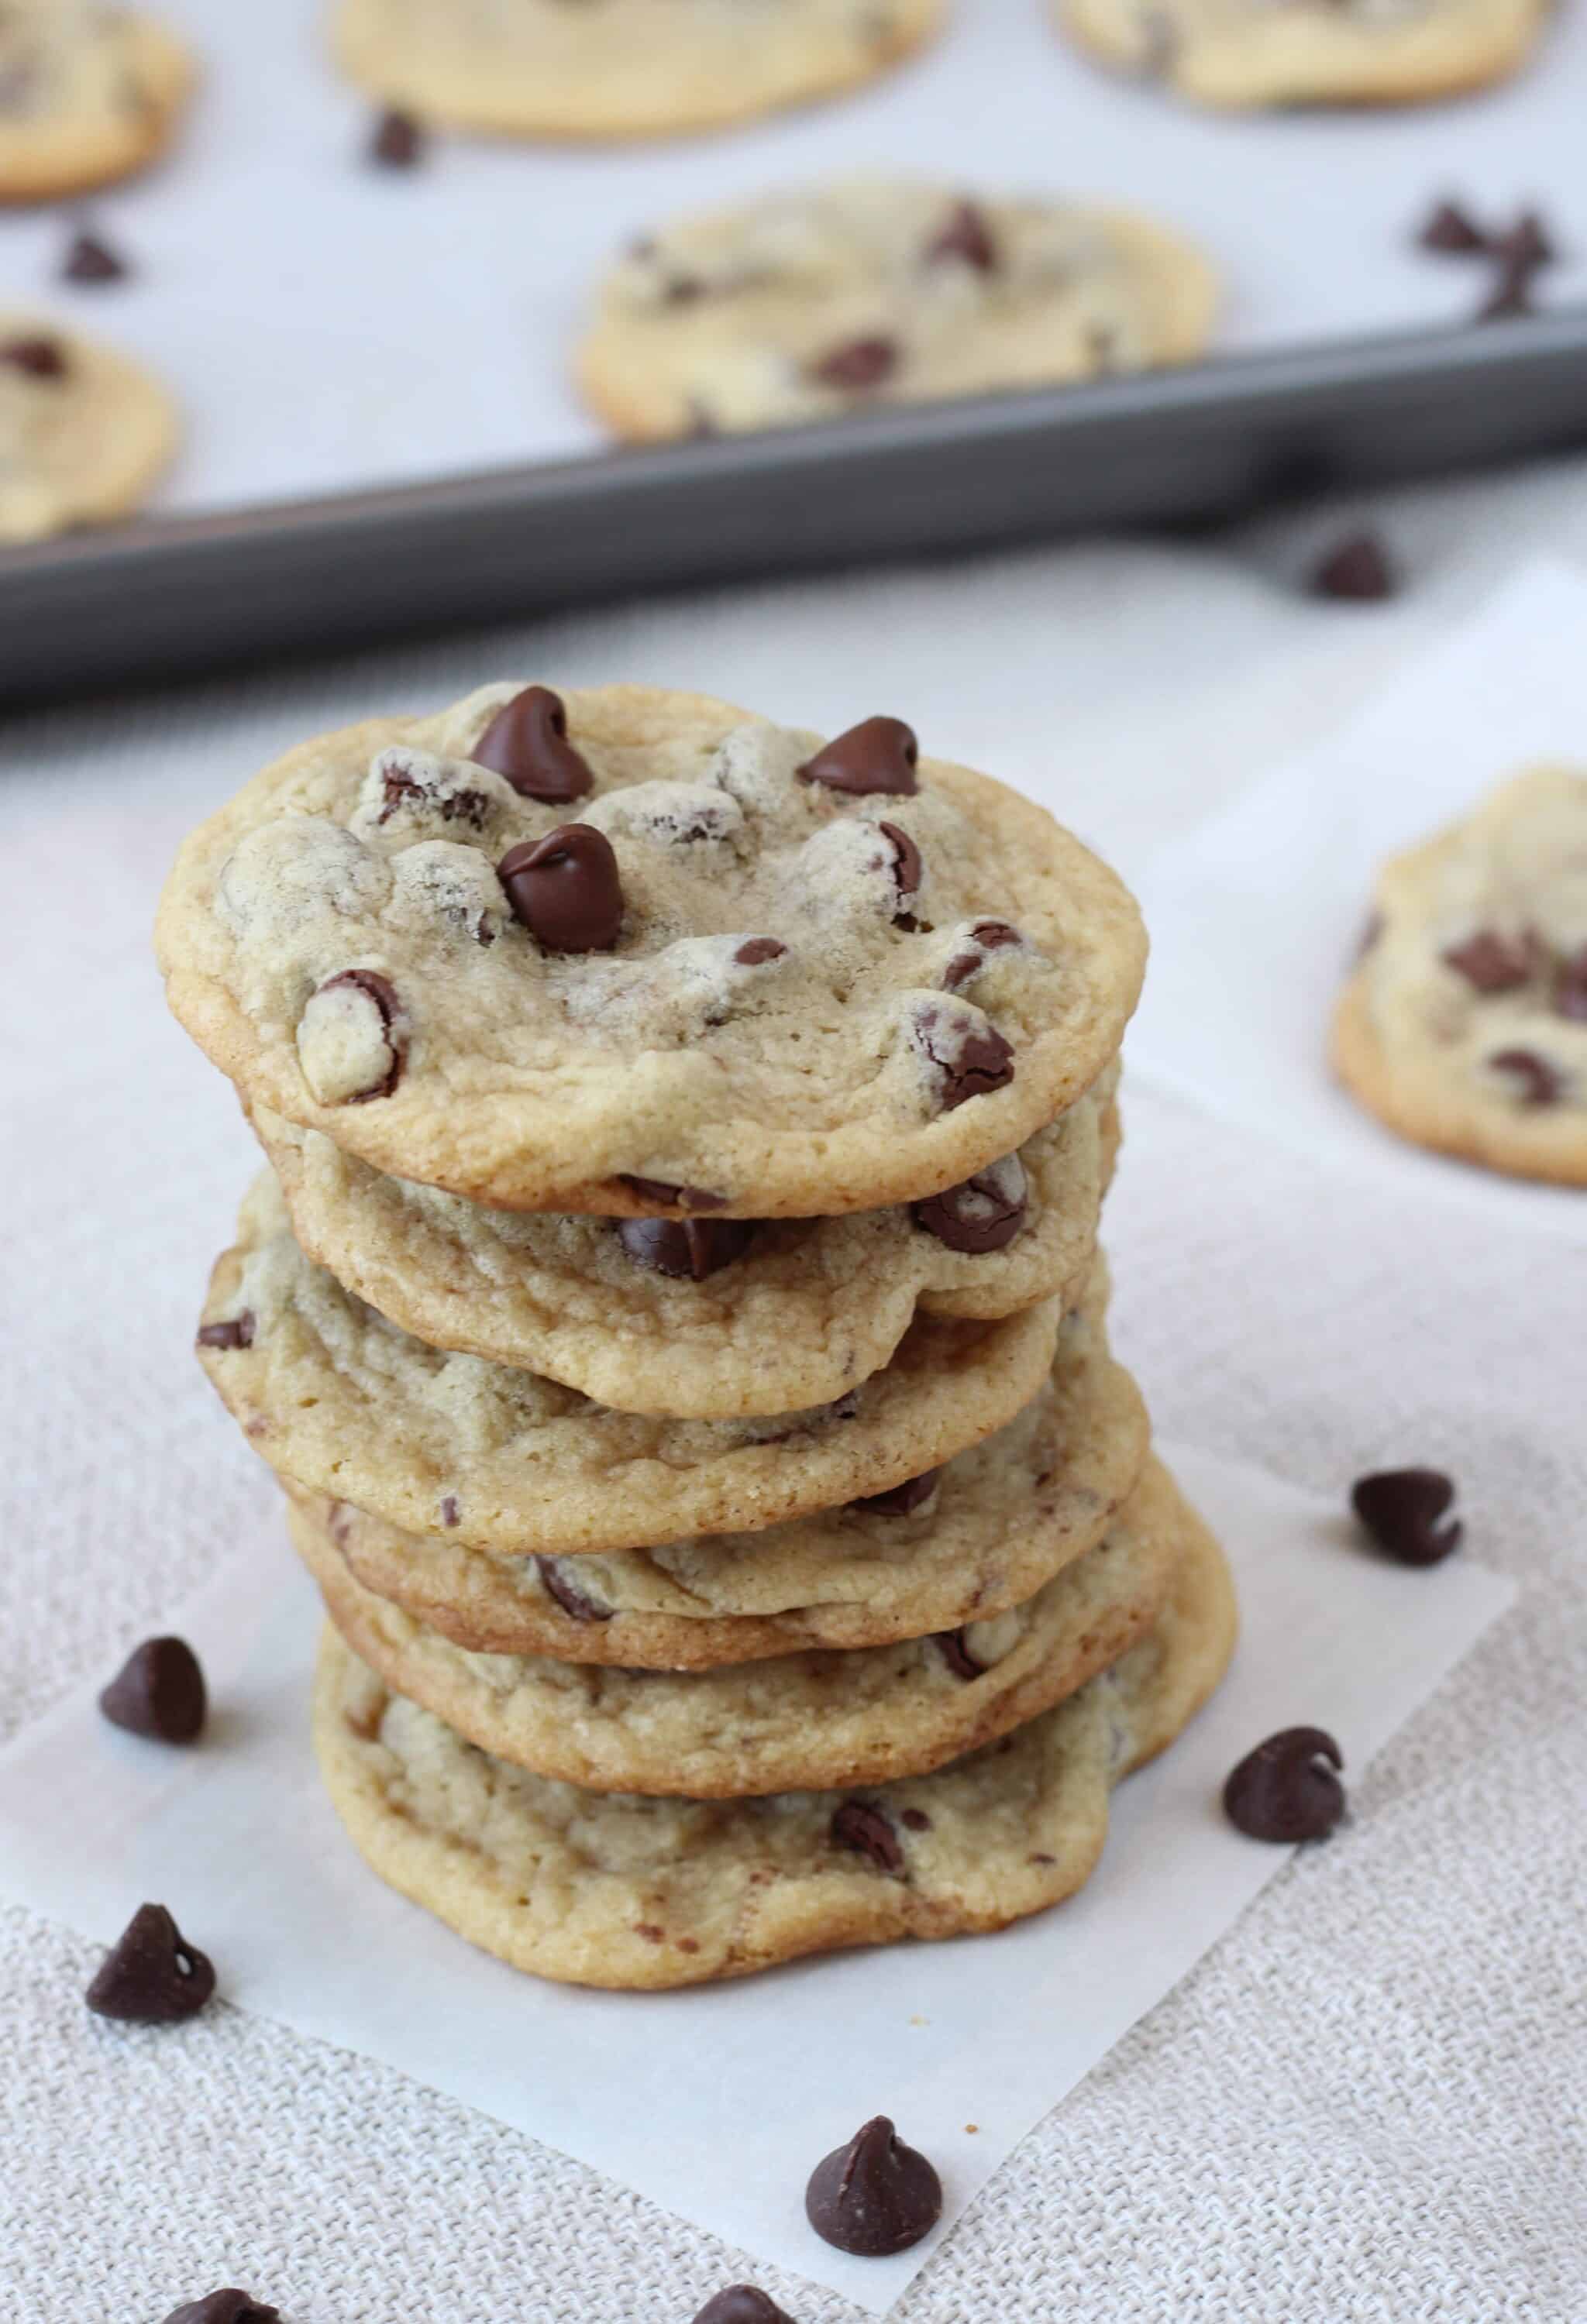 Chocolate Chip Cookies - The New York Times Top Rated Recipe!